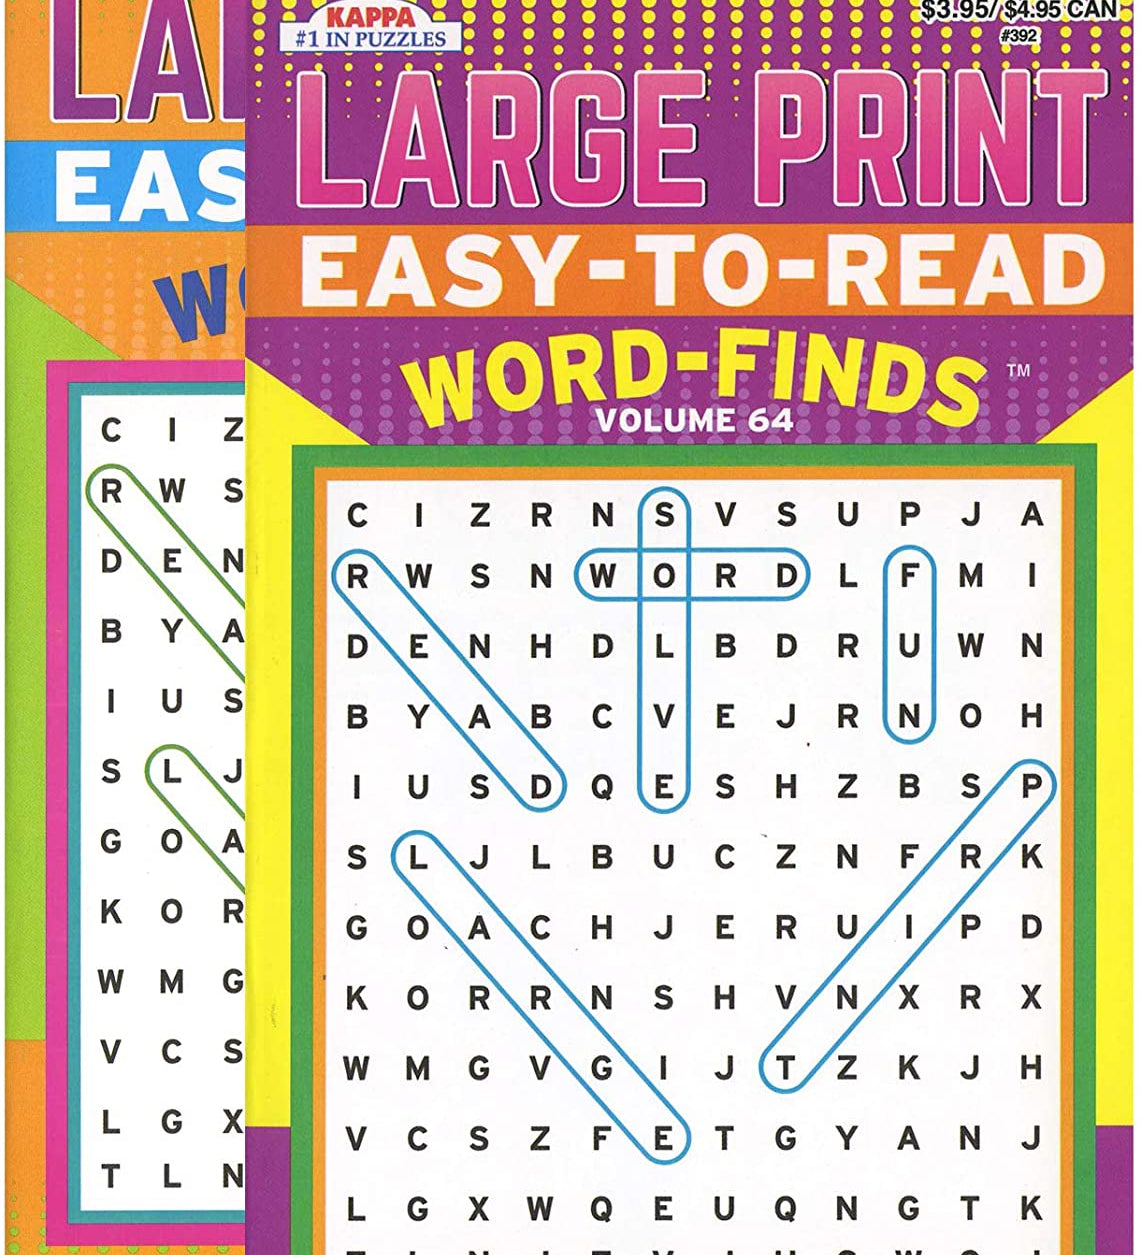 KAPPA Easy To Read Word Finds - Digest Size.